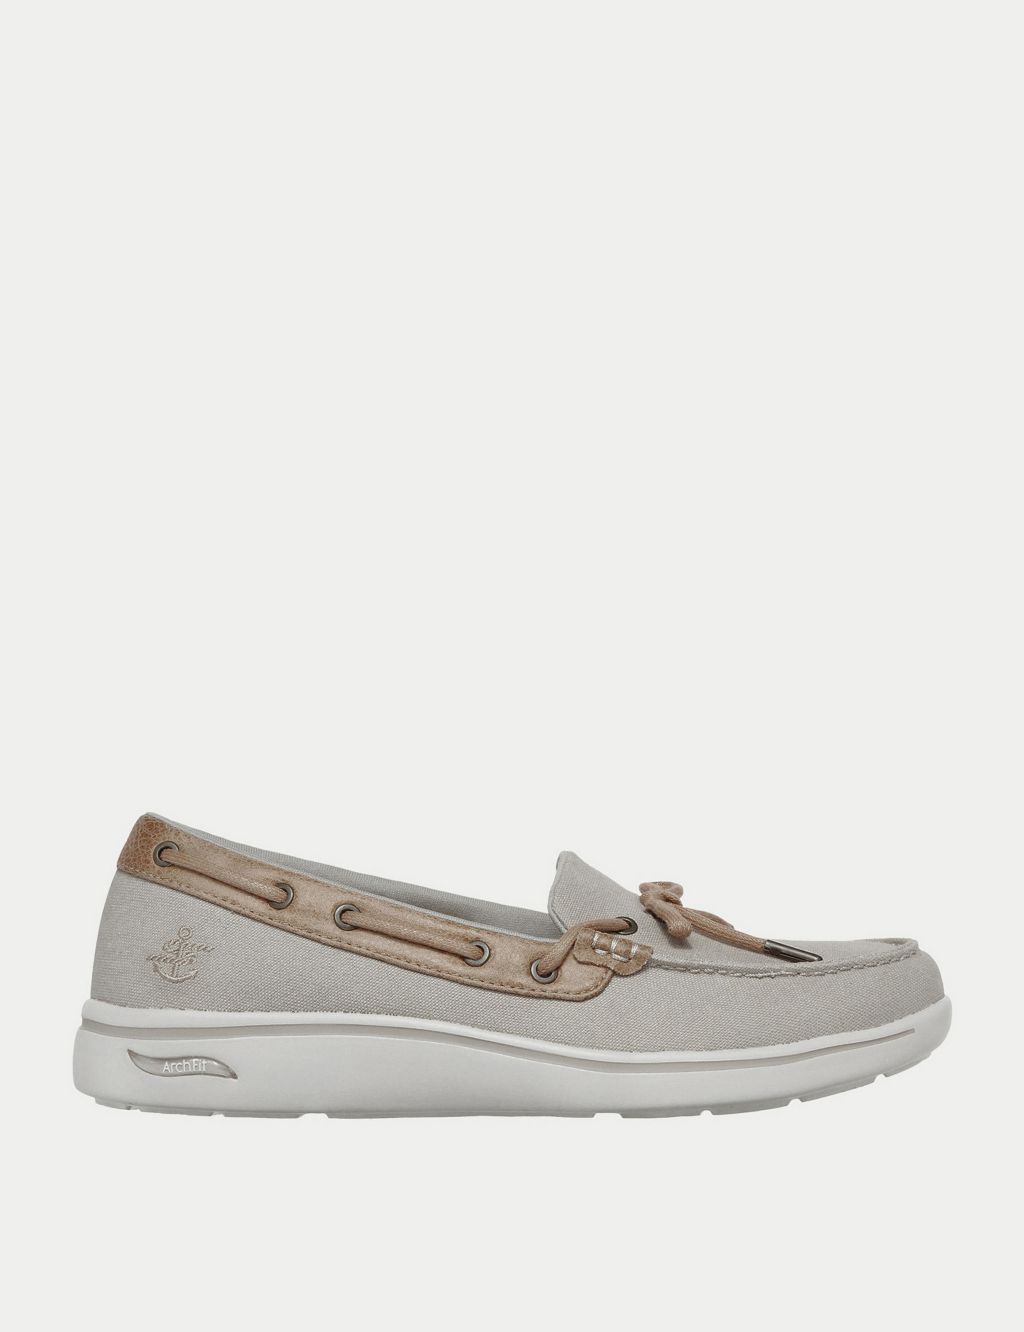 Arch Fit™ Uplift Shoreline Canvas Boat Shoes 3 of 5